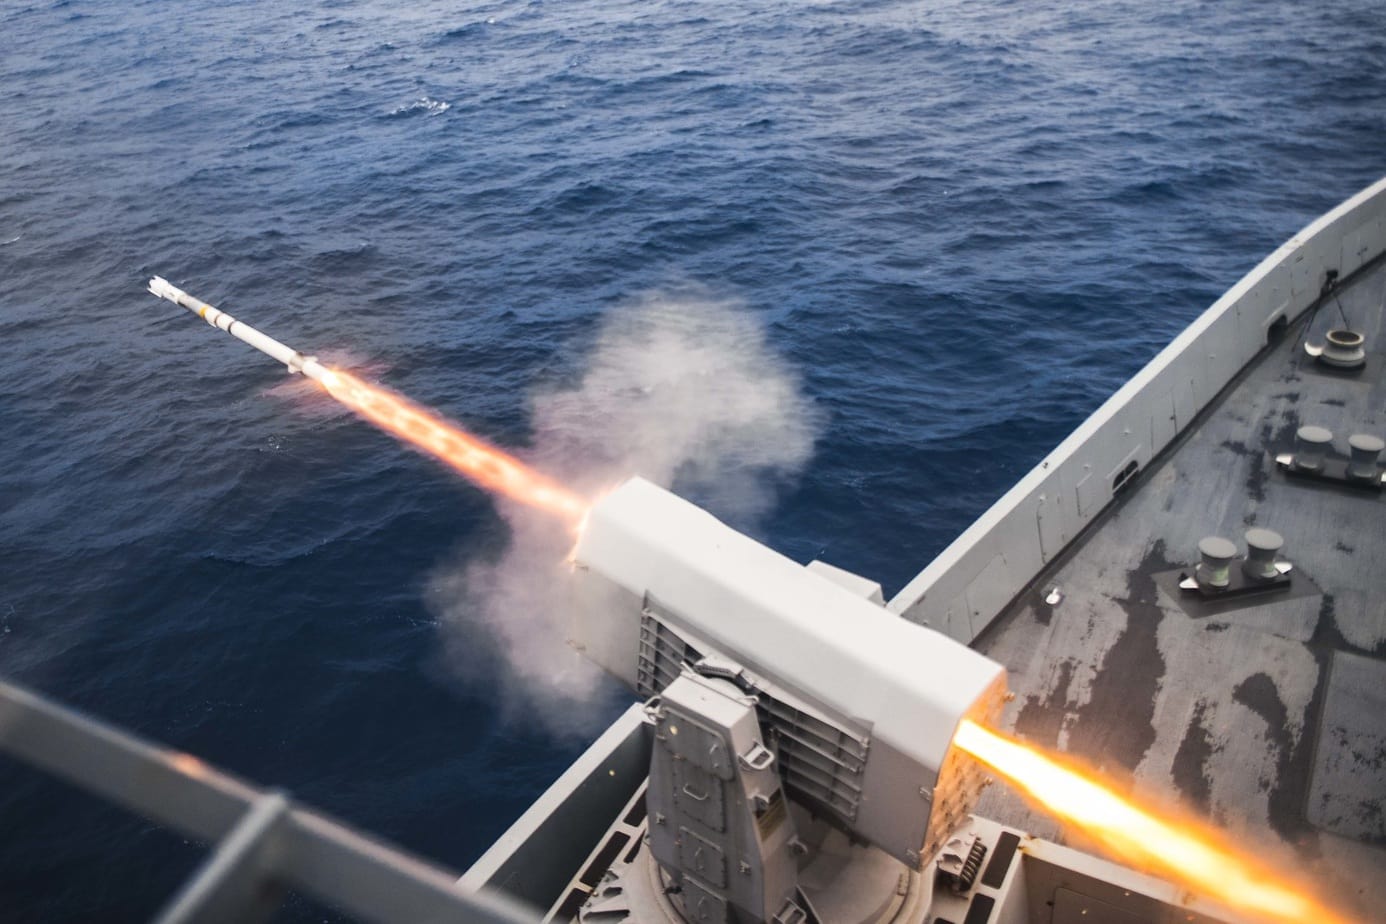 The US developing powerful laser weapon to counter Chinese hypersonic missile: Report